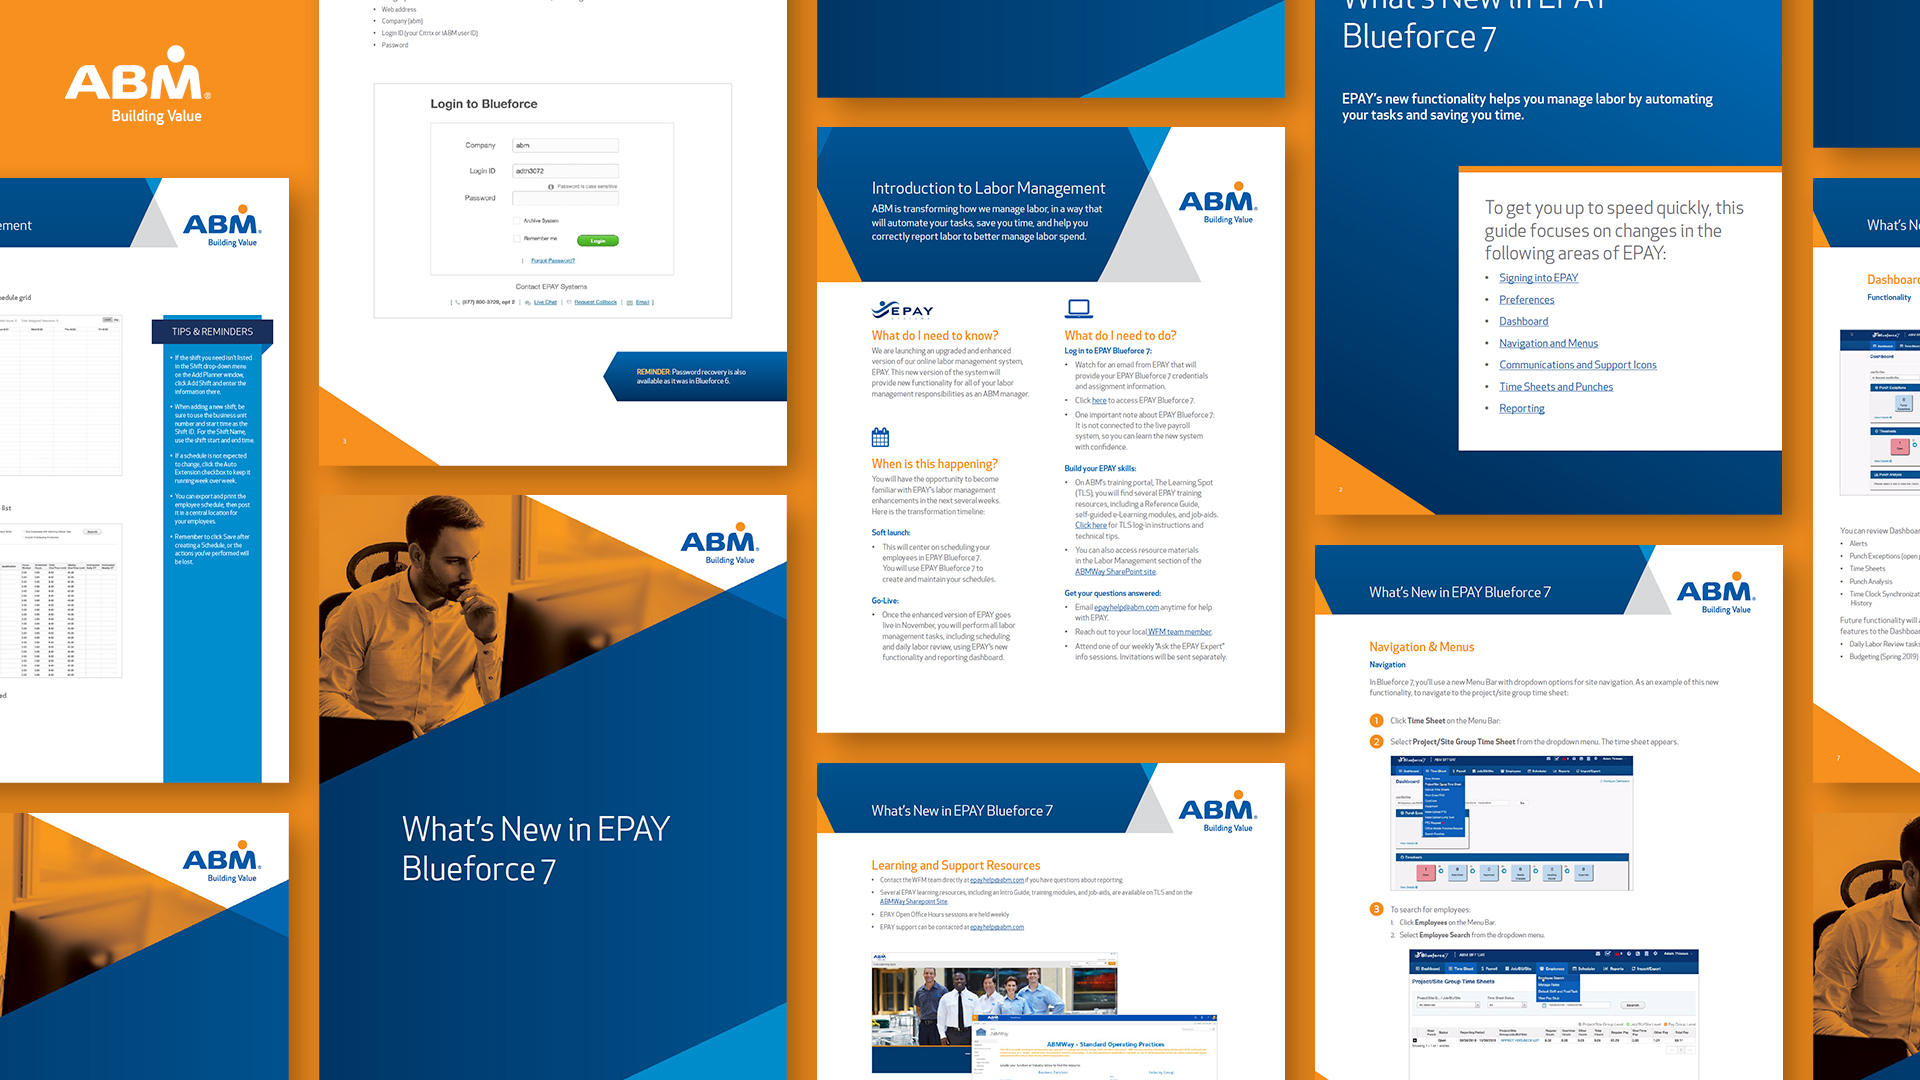 <strong>ABM – Labor Management Job Aids</strong><small> As part of a major change management initiative, we worked closely with ABM to develop a series of resources to educate their employees on several new technology platforms they would need to become acquainted with.</small>